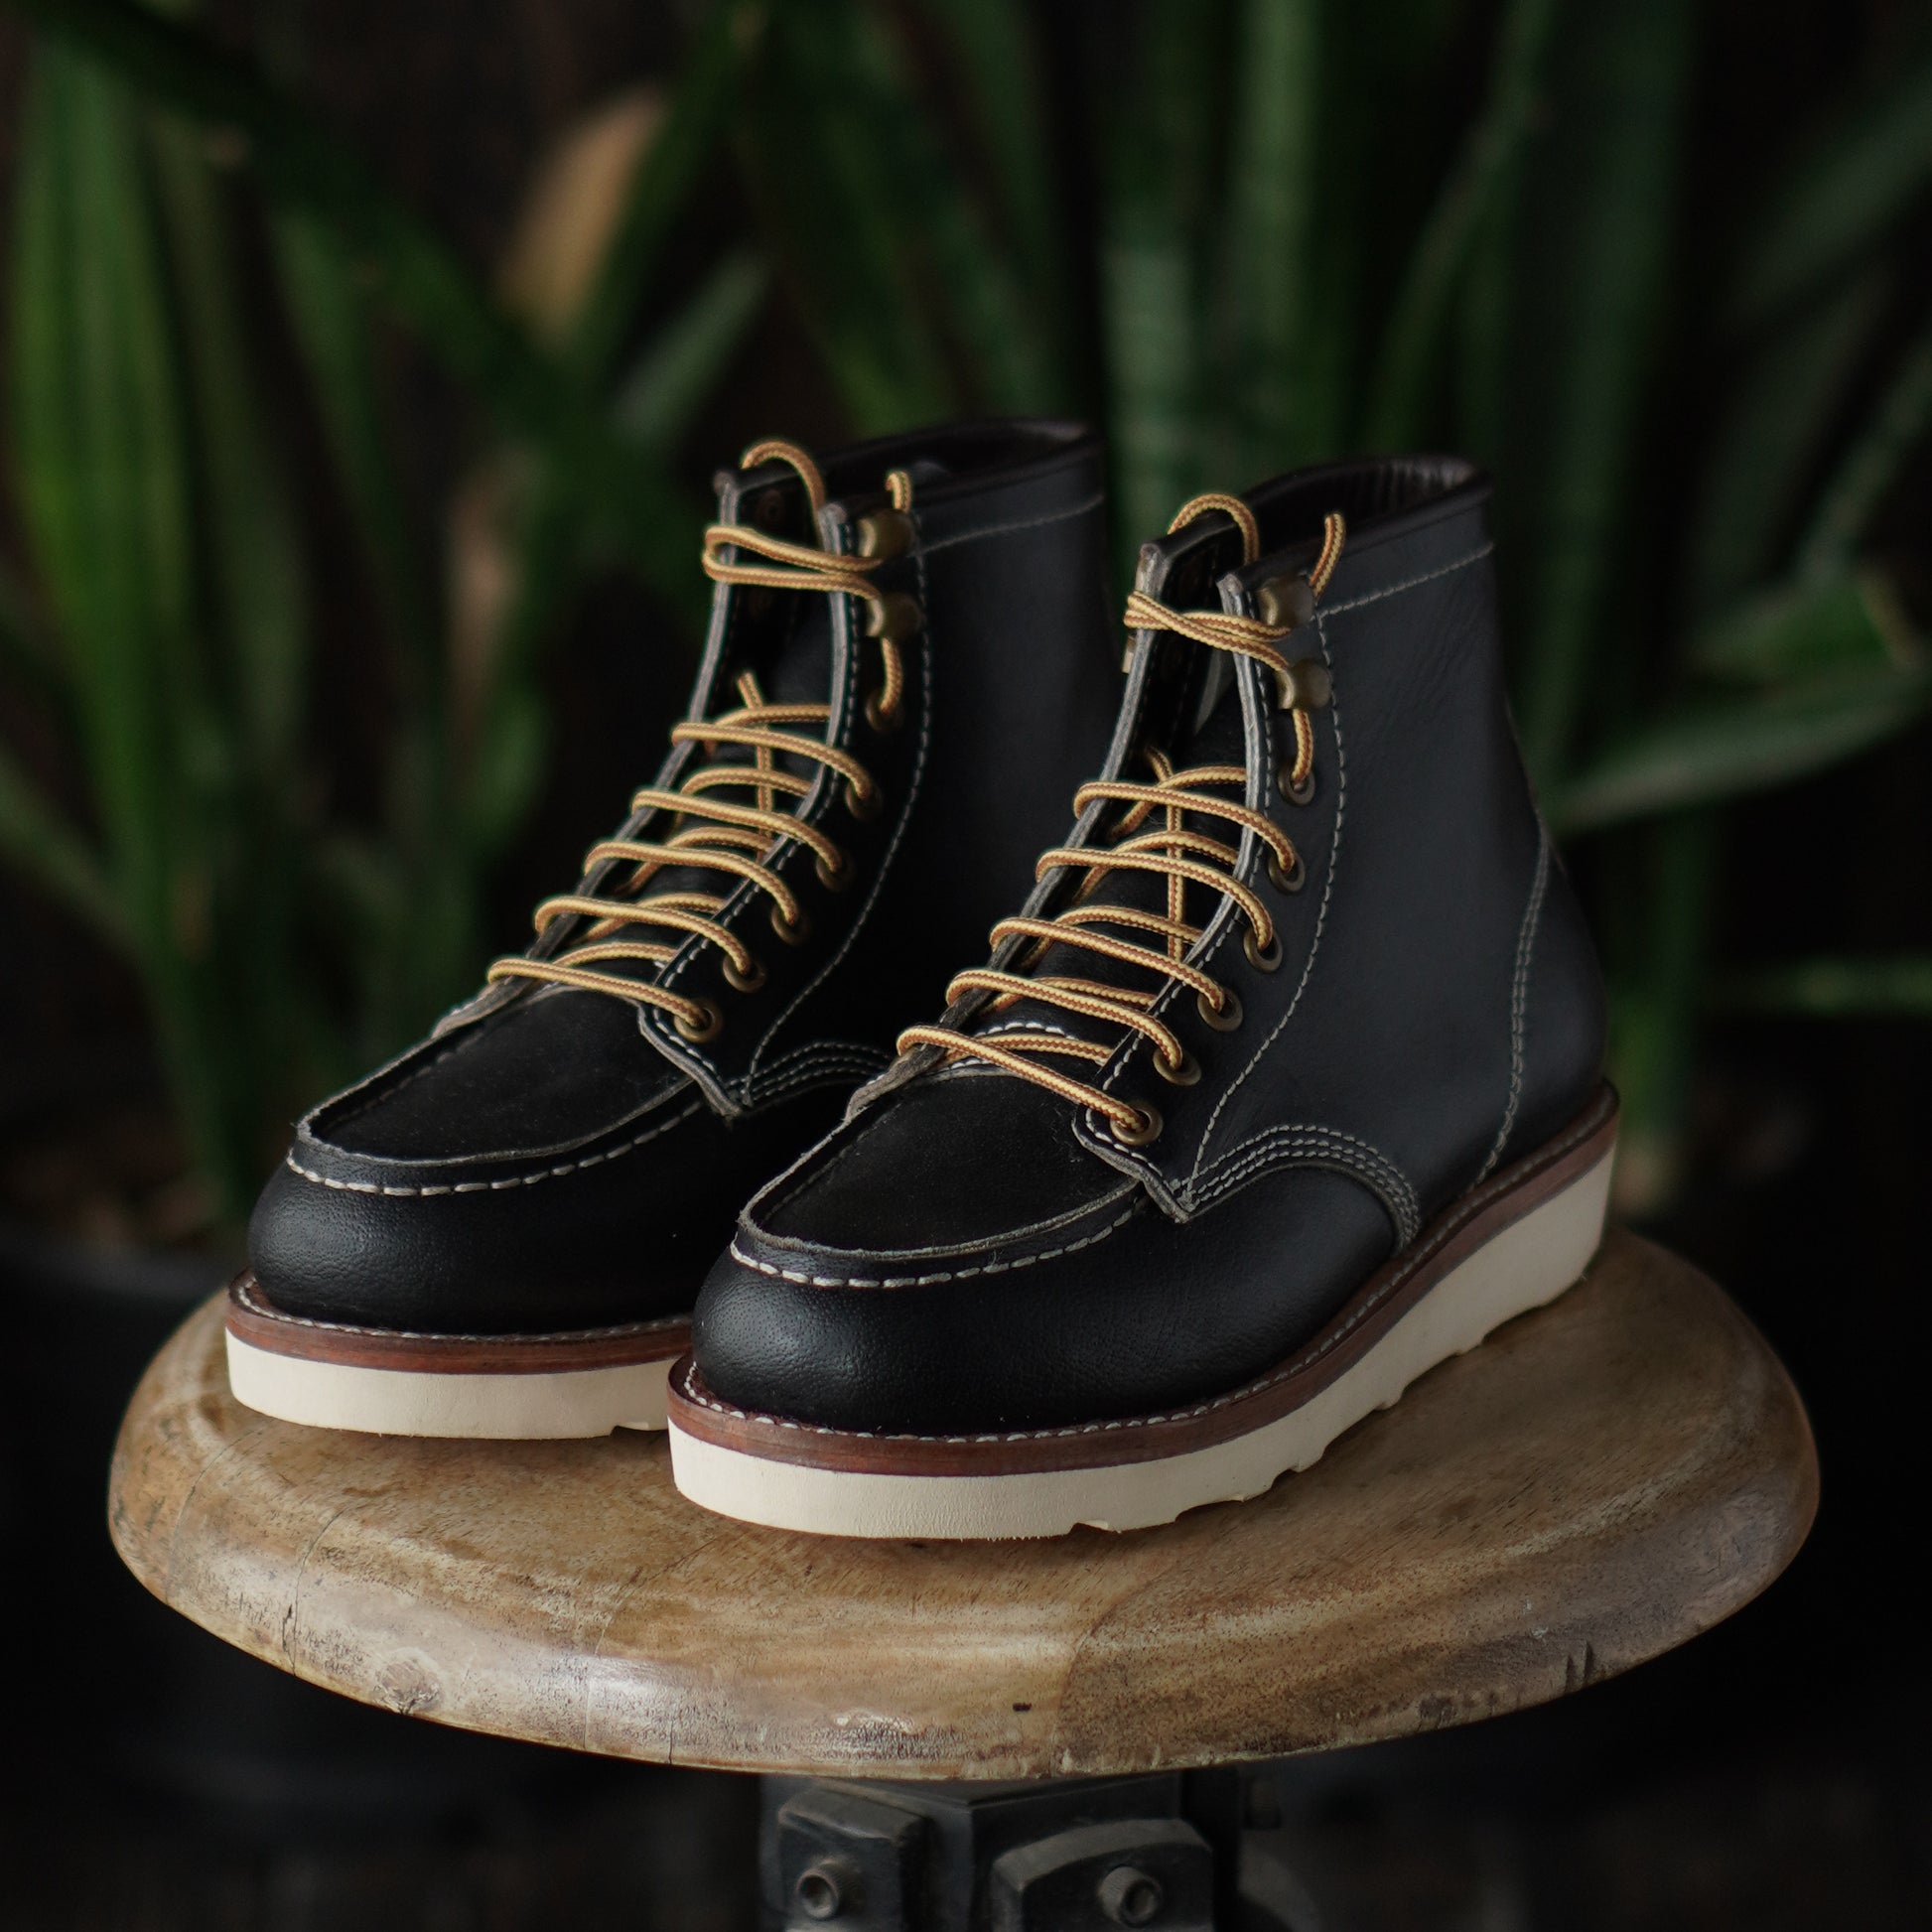 Chaussures Moc-Toe (Raven Black) Goodyear Welted – Craft & Glory